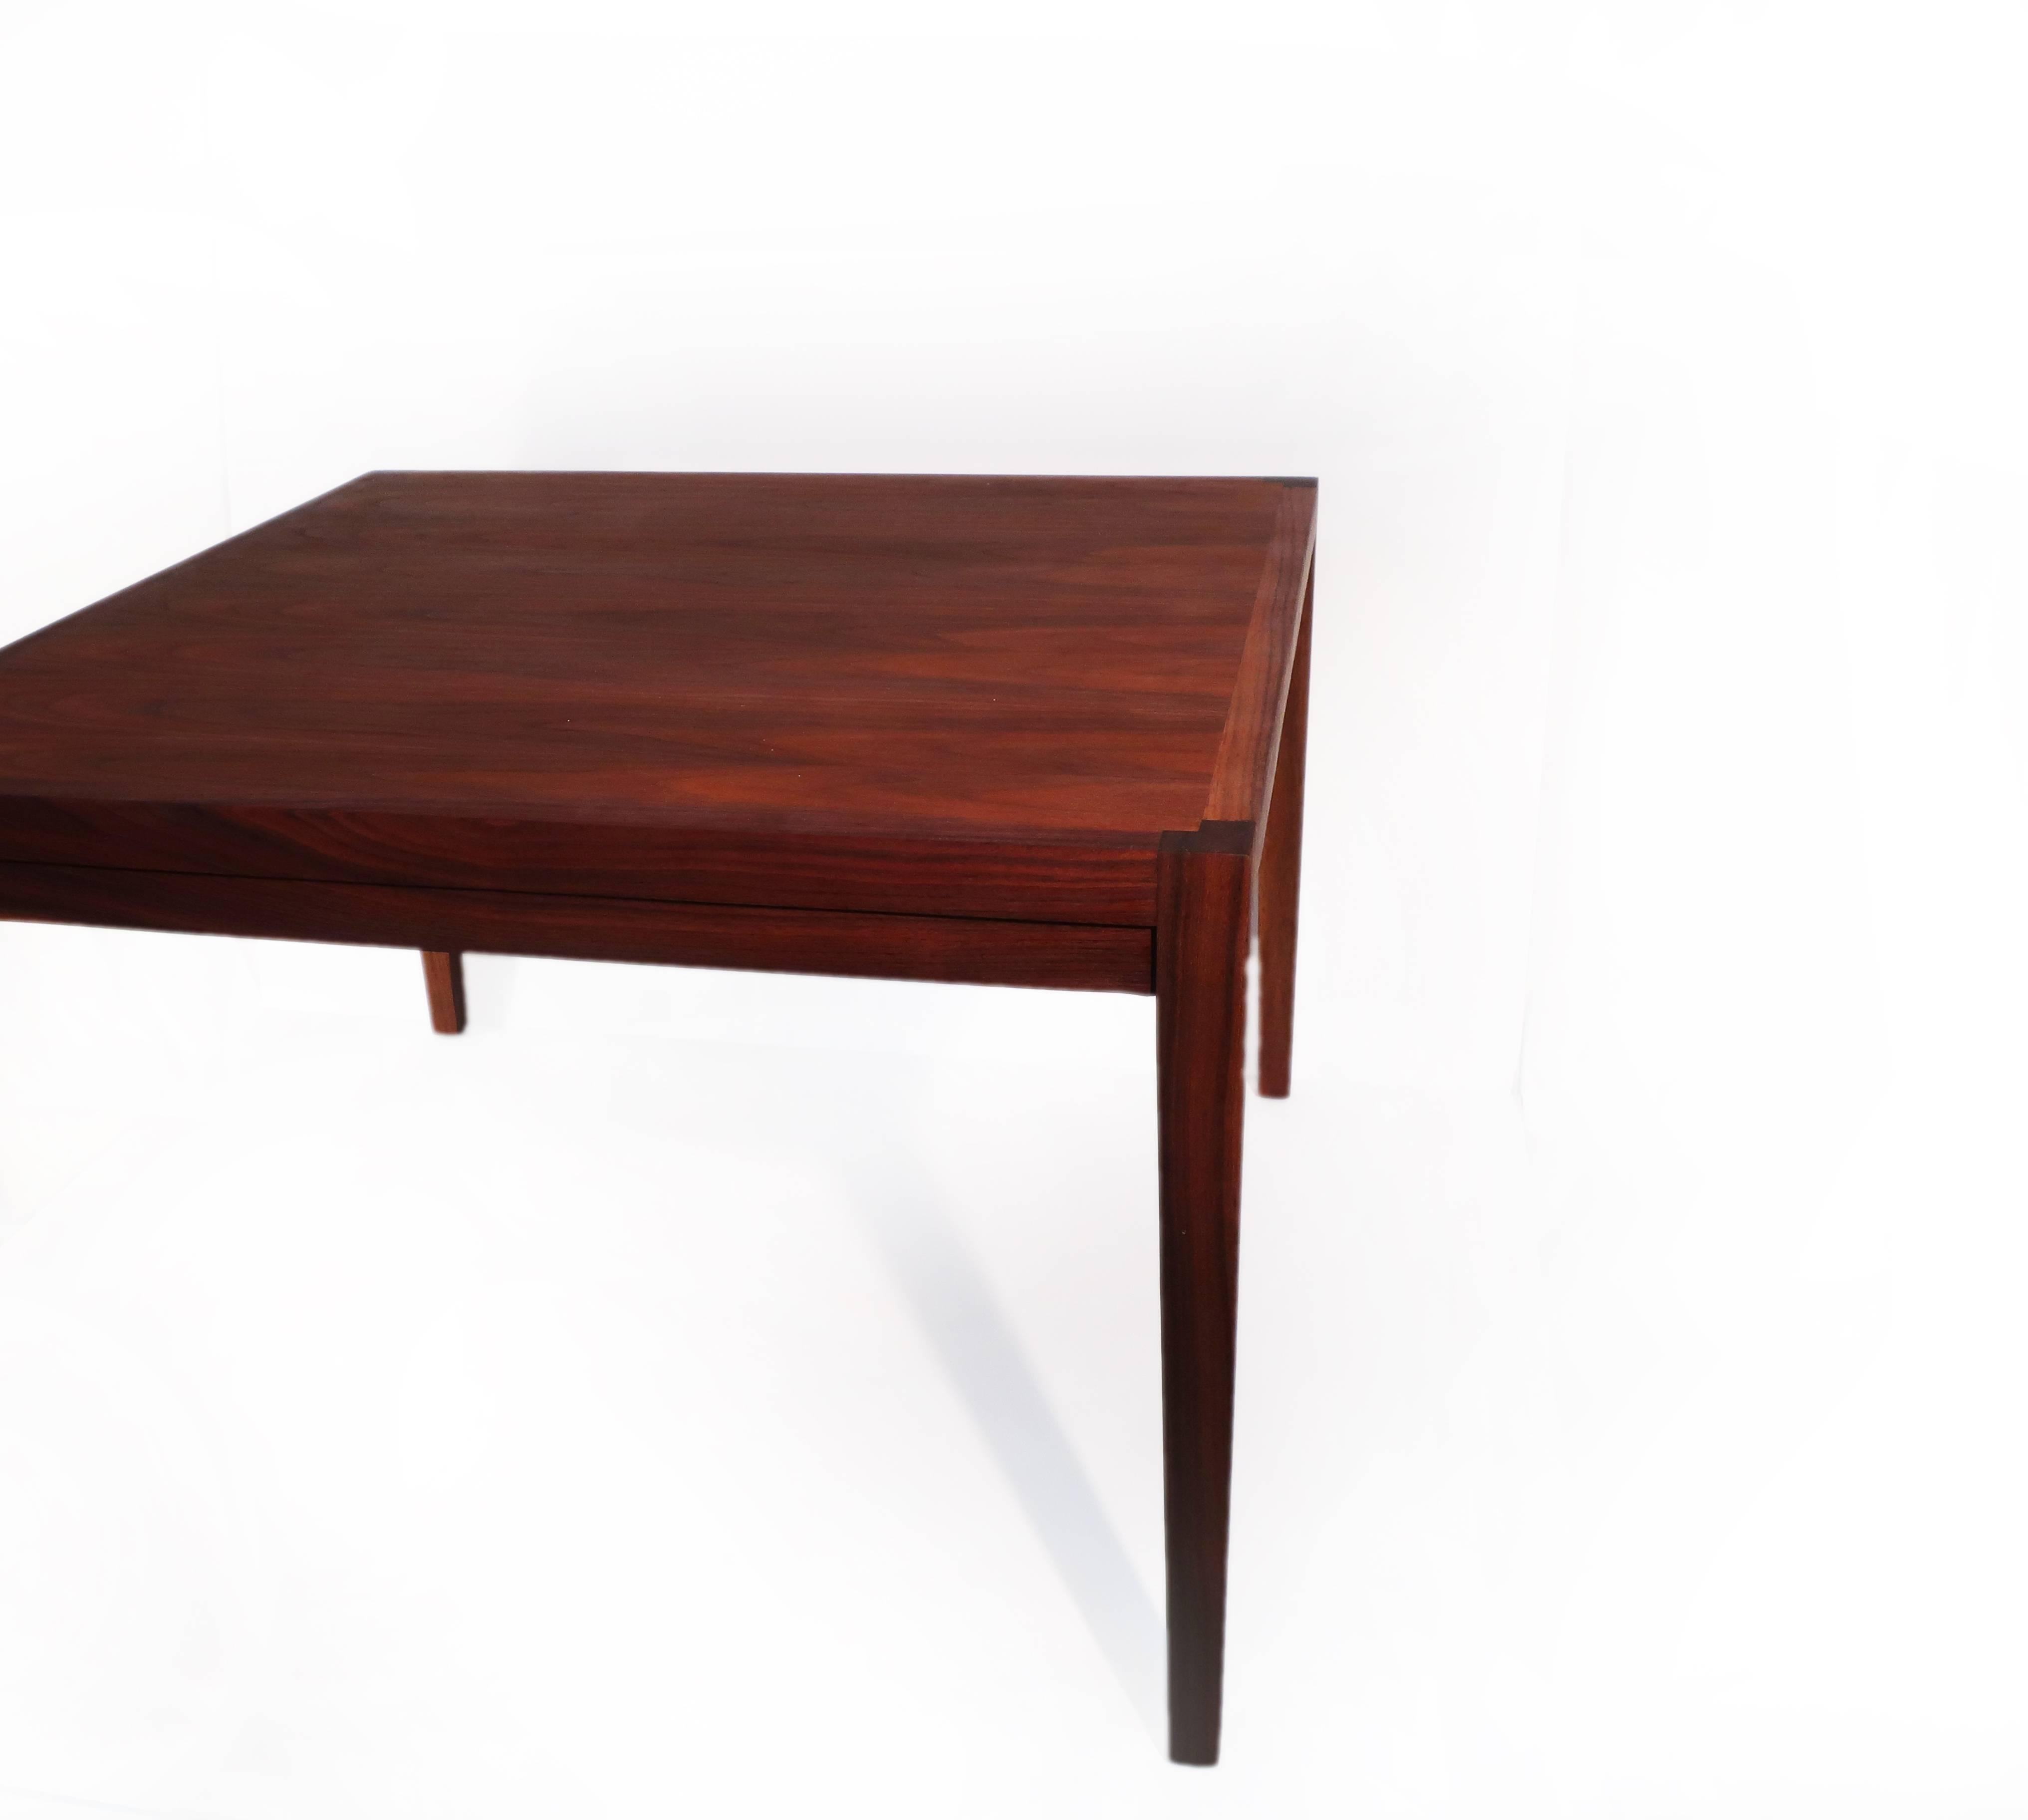 This Danish square teak coffee table has a beautiful grain across the top and lovely contrasting end grain corners. It has recently been refinished to return it to the beautiful shape it was in at the beginning of its life. This table is